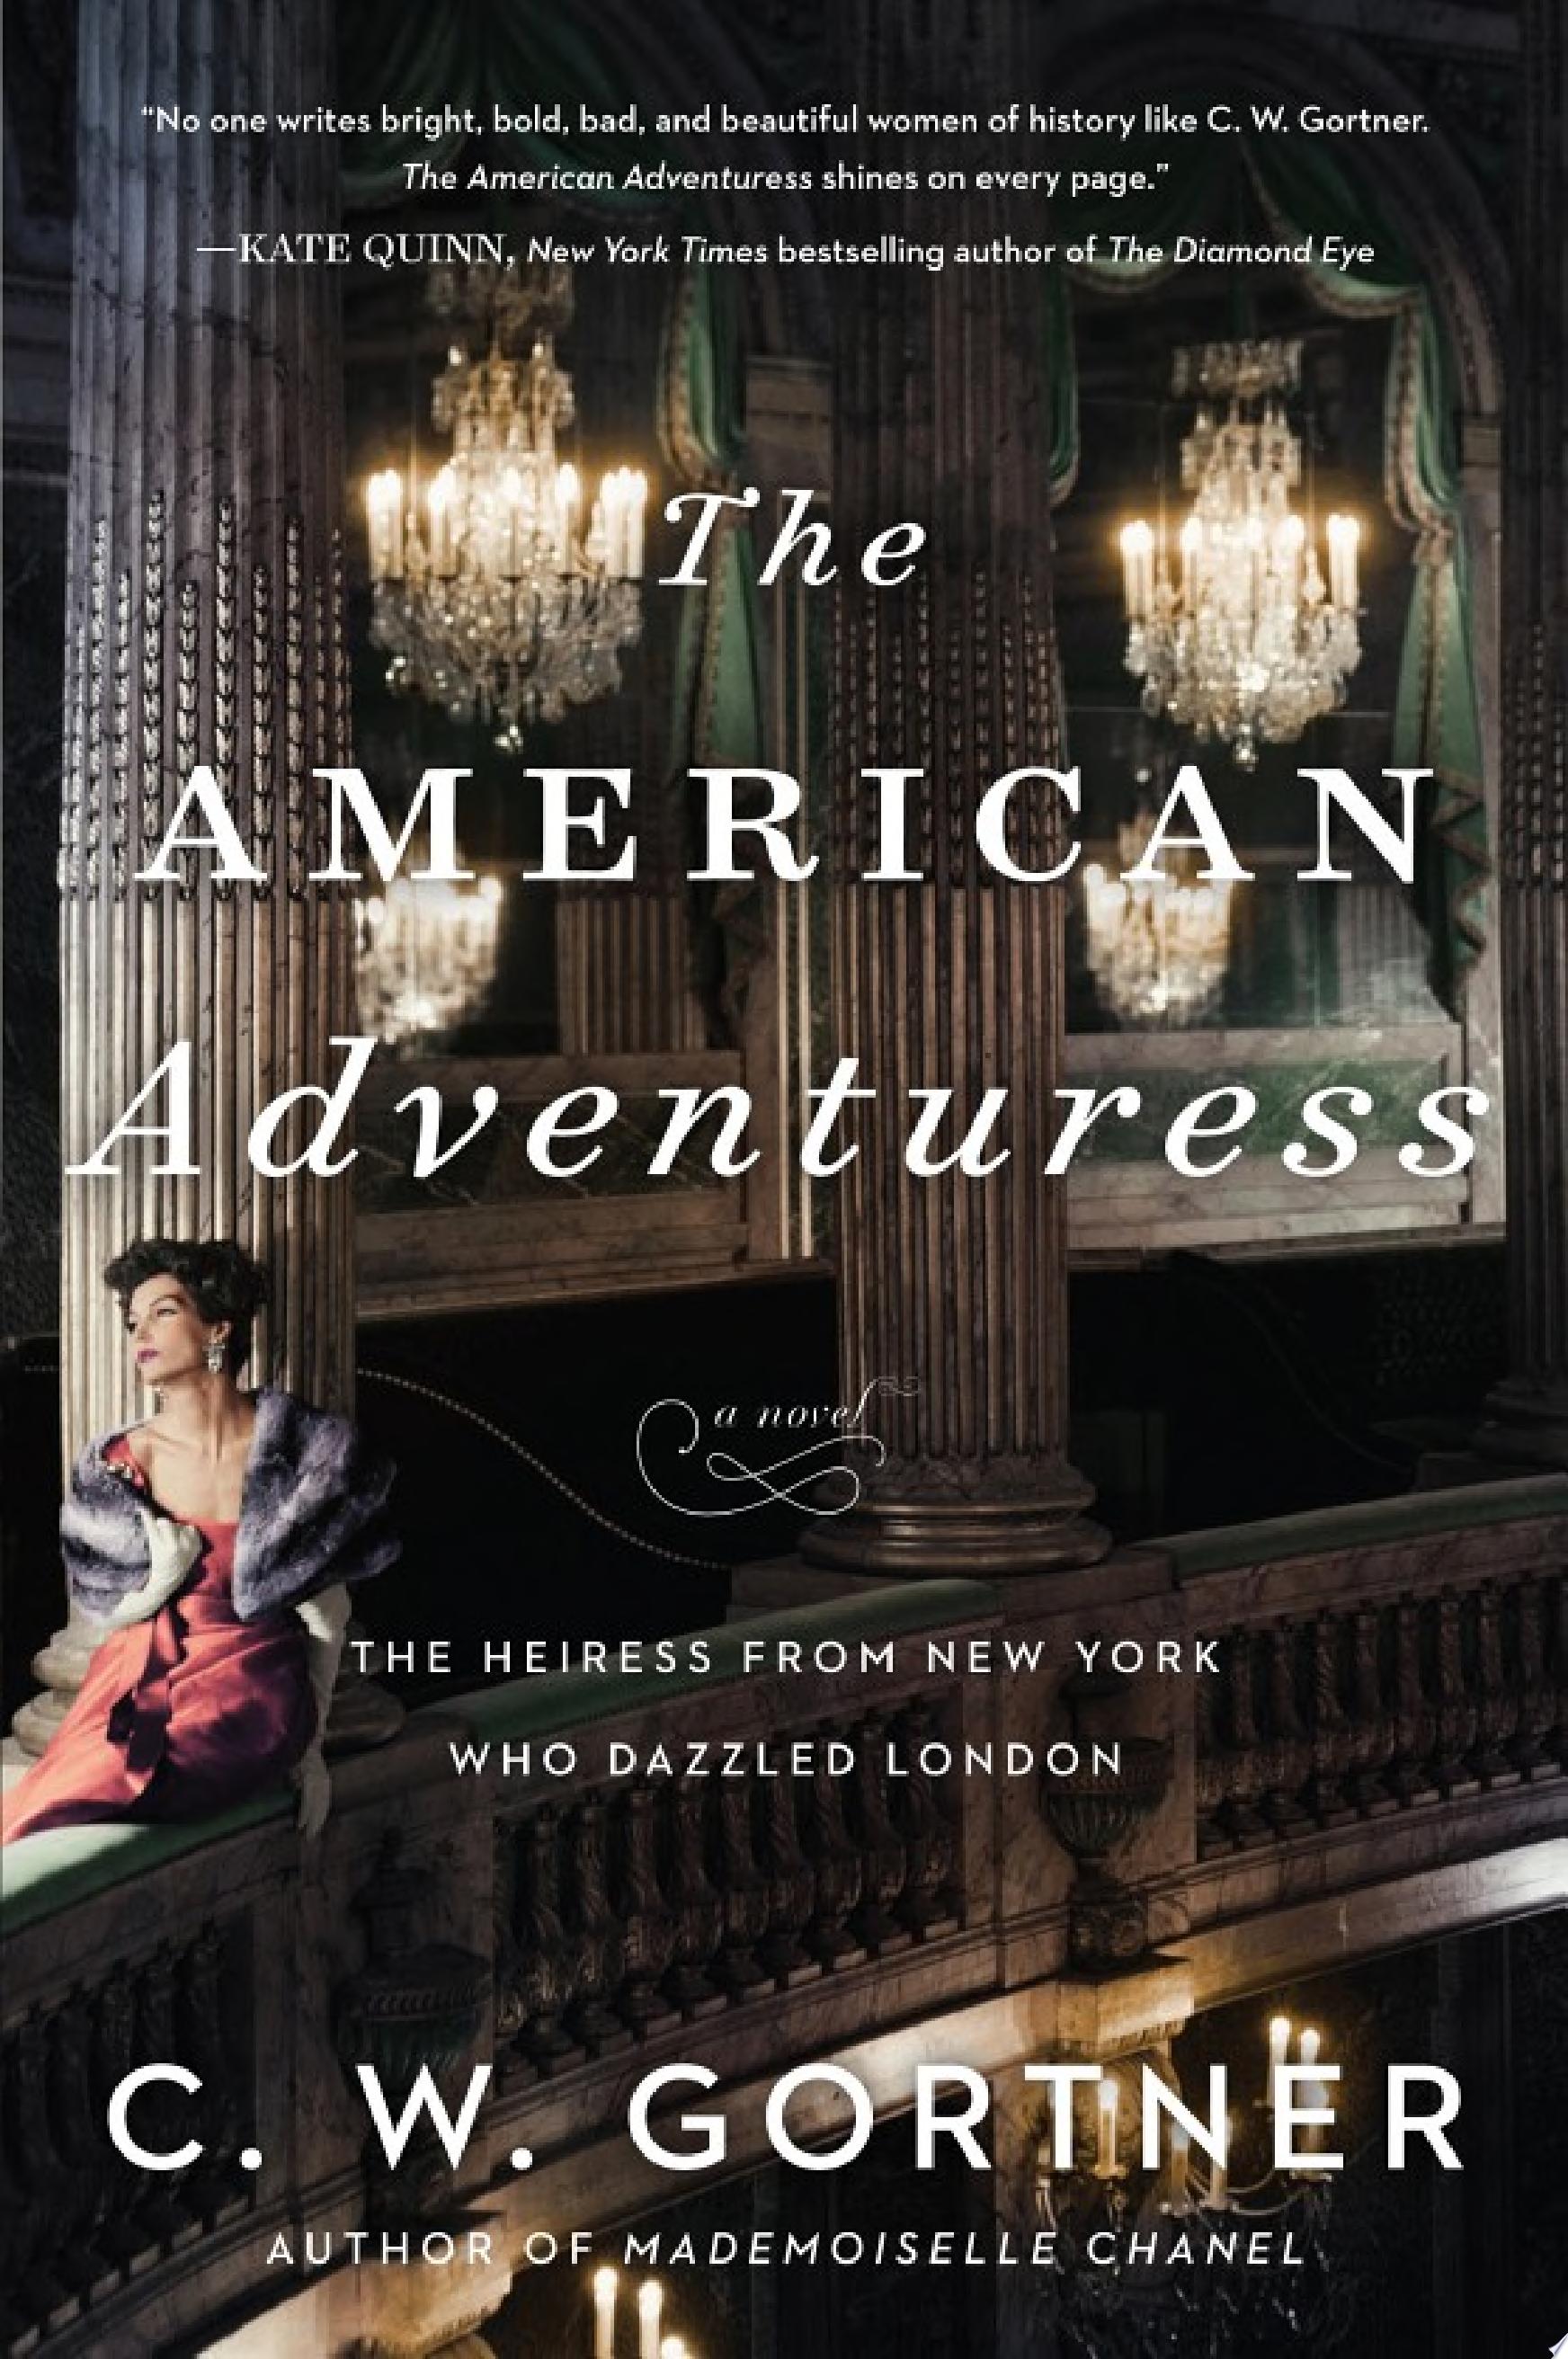 Image for "The American Adventuress"